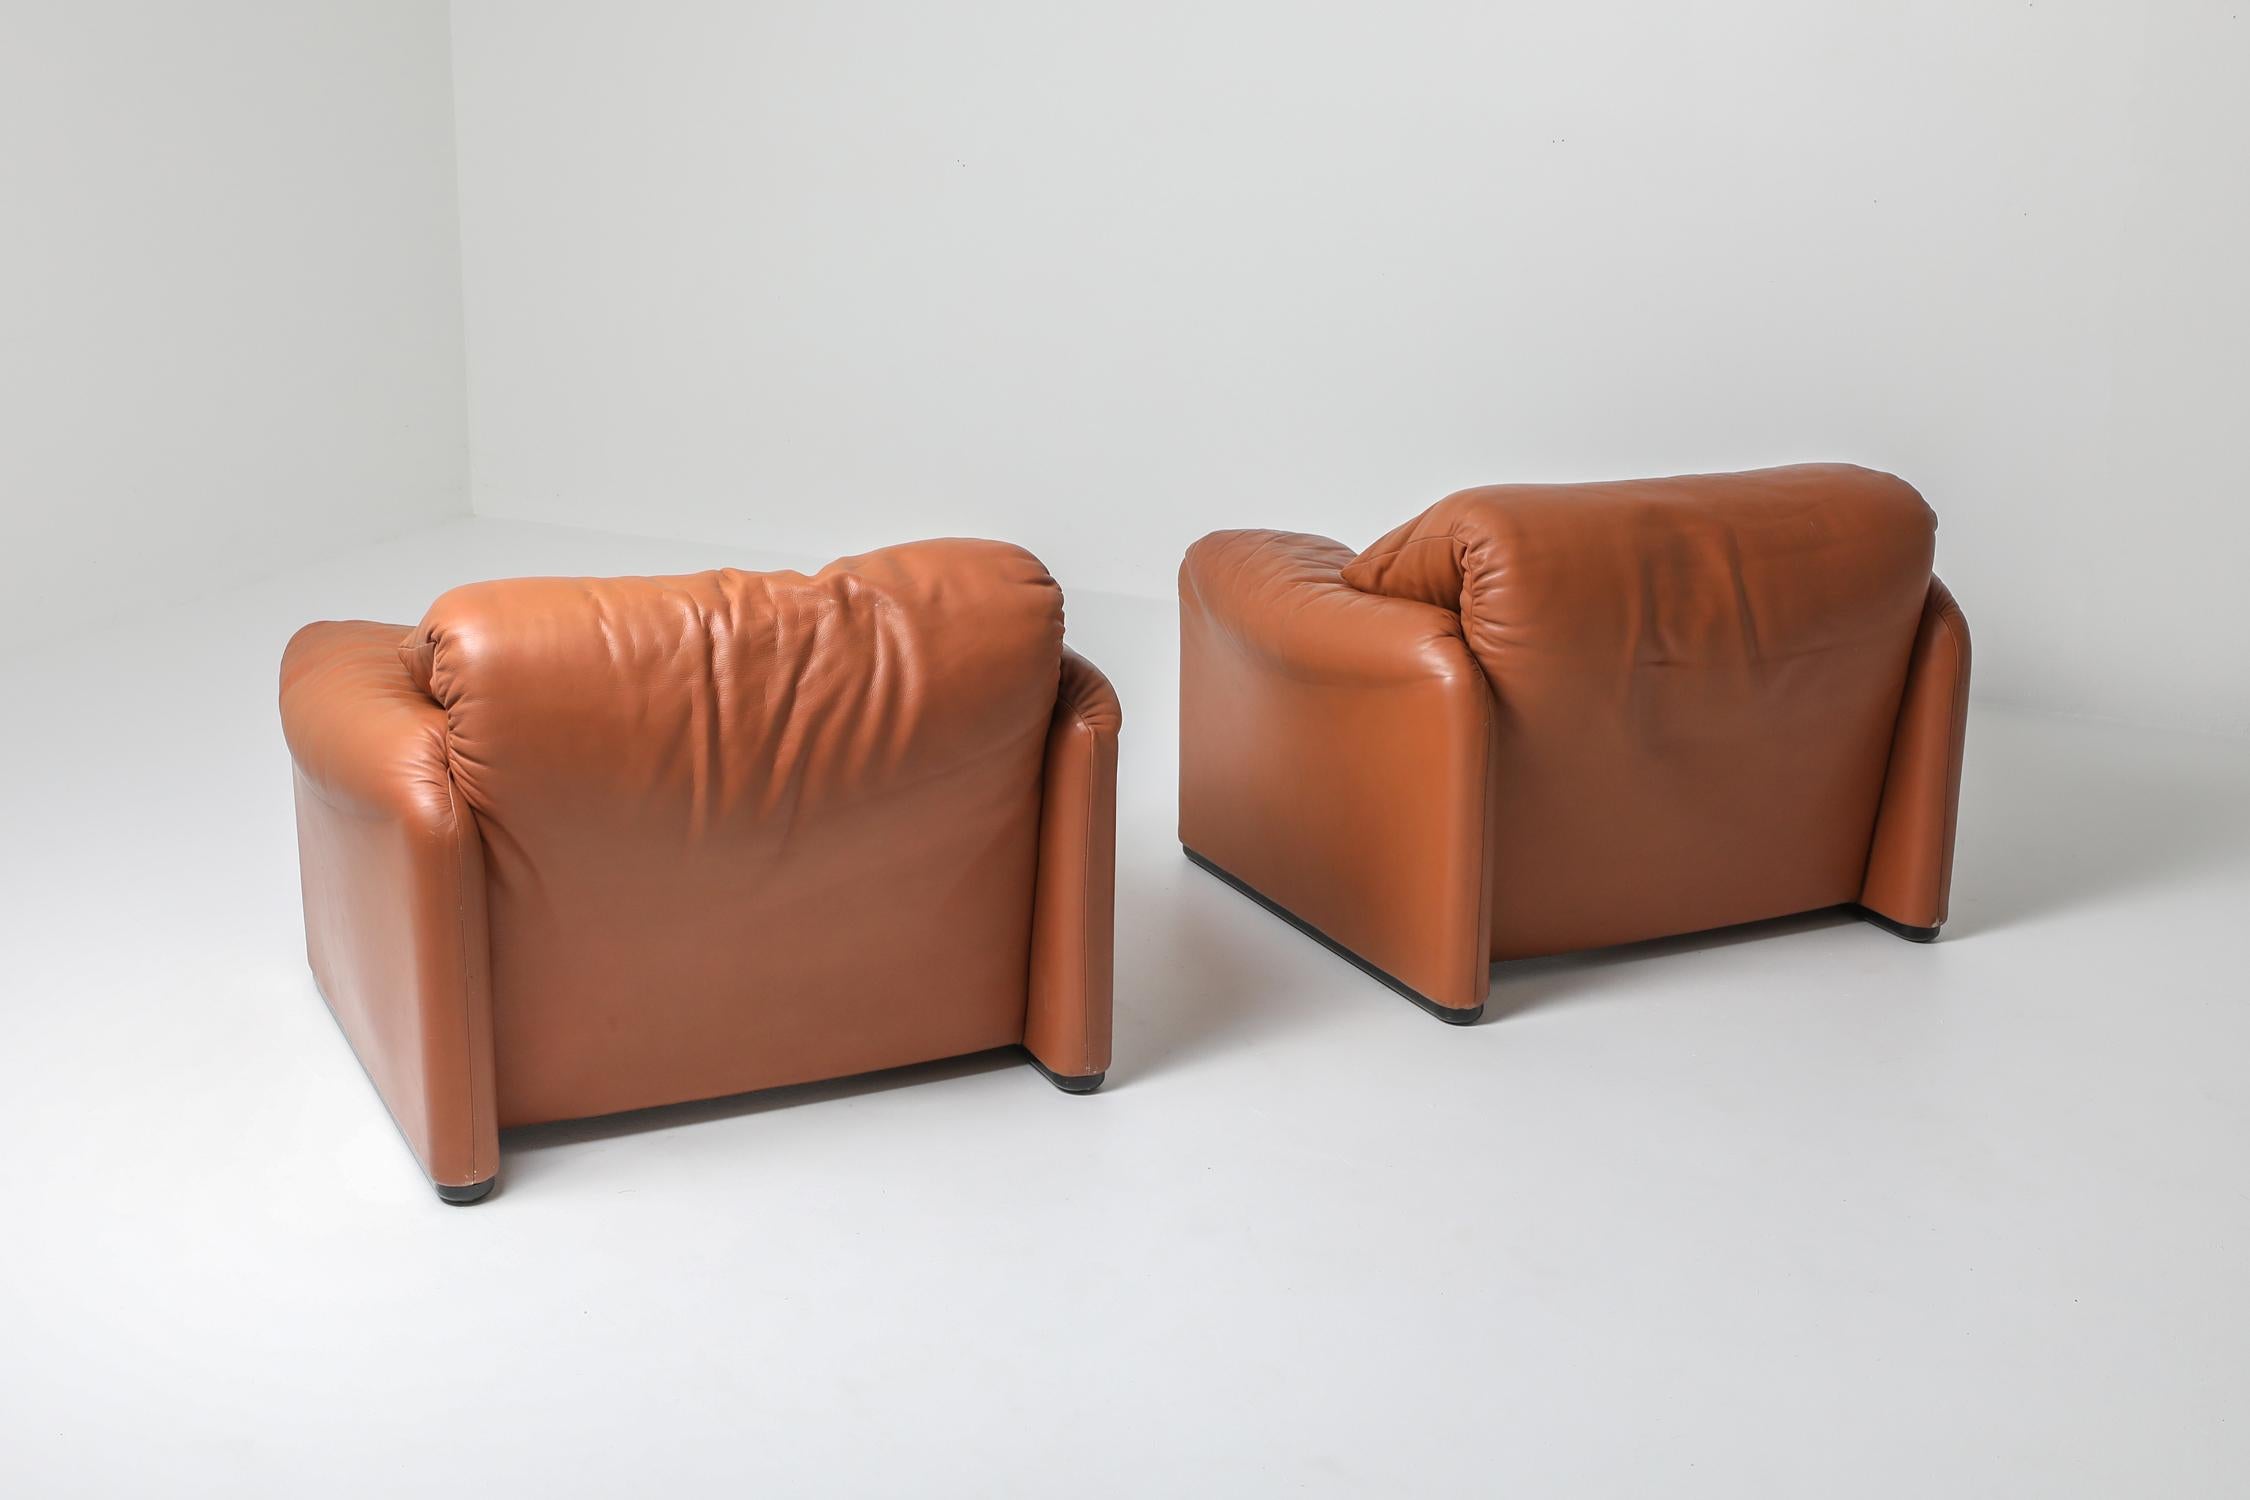 20th Century Maralunga Cognac Leather Club Chairs by Vico Magistretti for Cassina, 1974